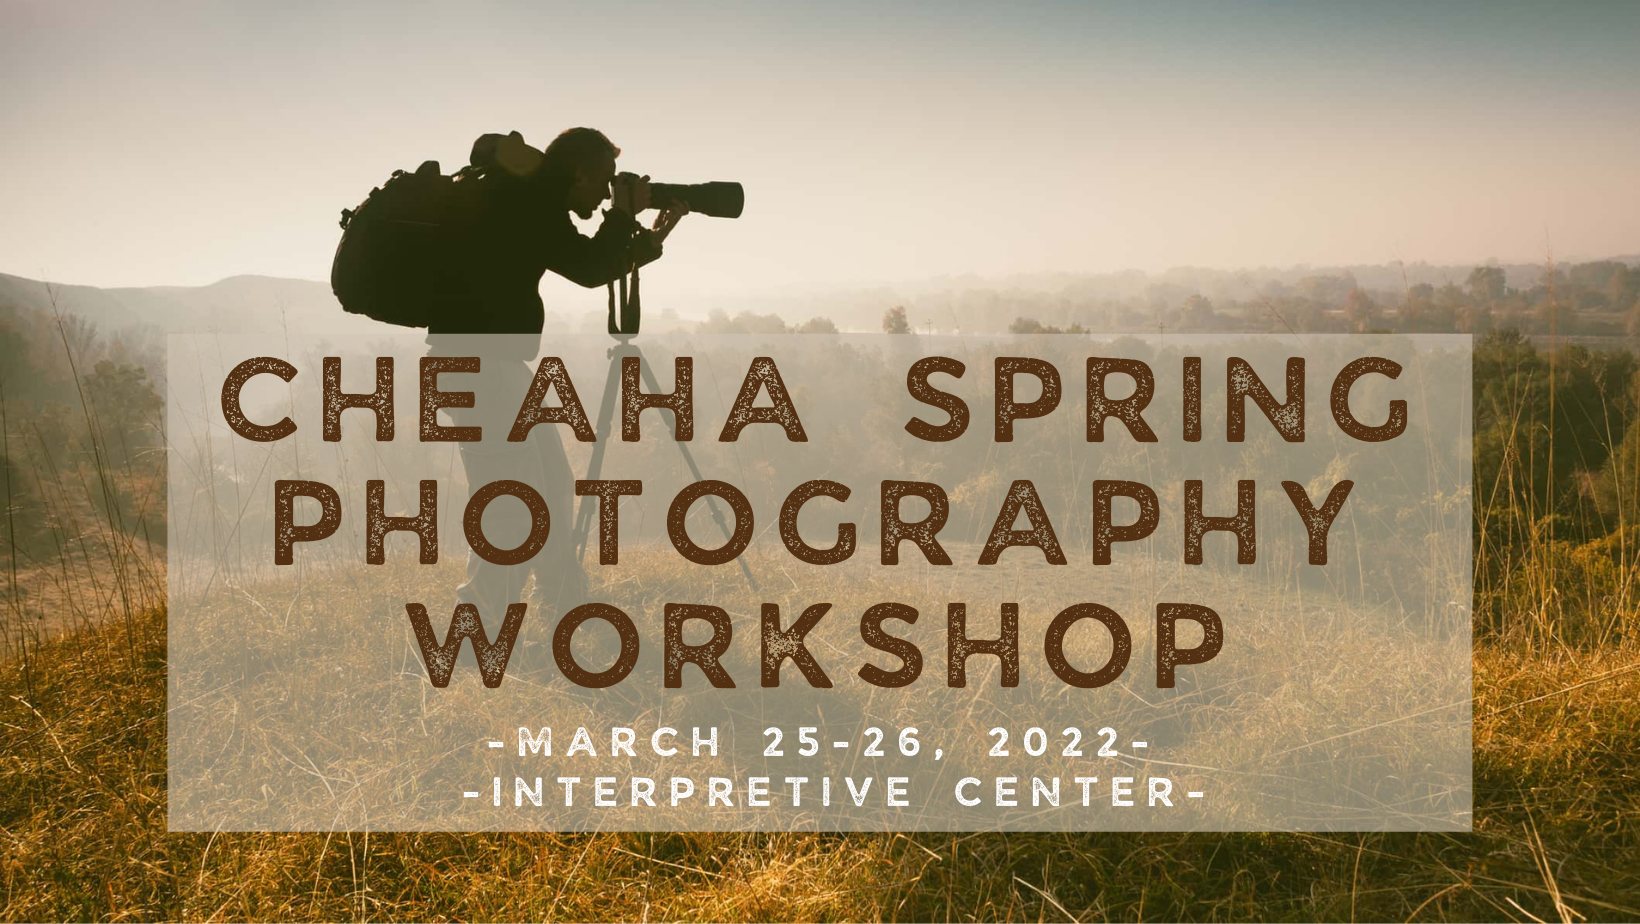 CSP 2022 Cheaha Spring Photography Workshop